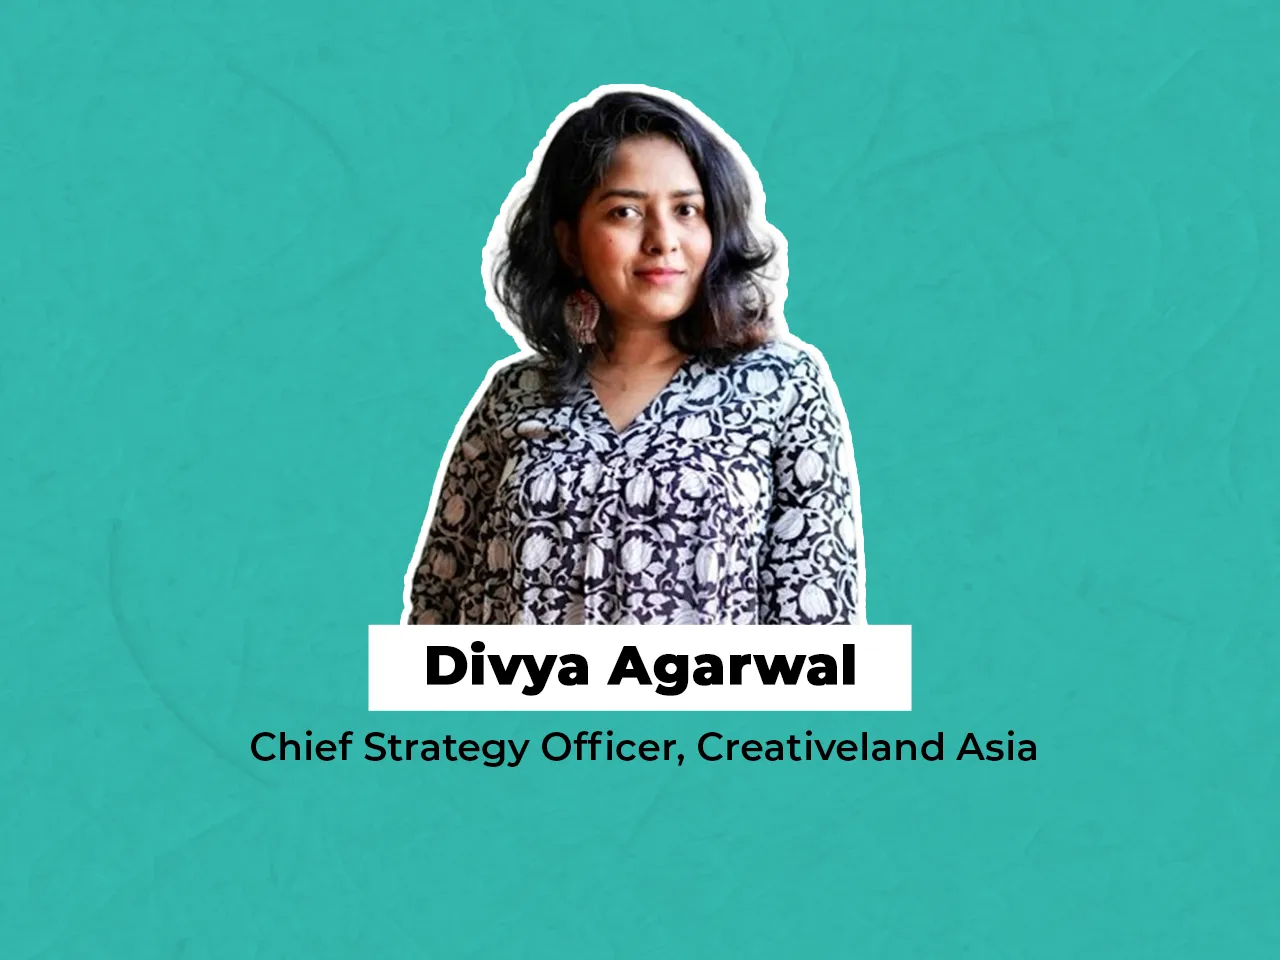 Creativeland Asia appoints Divya Agarwal as Chief Strategy Officer